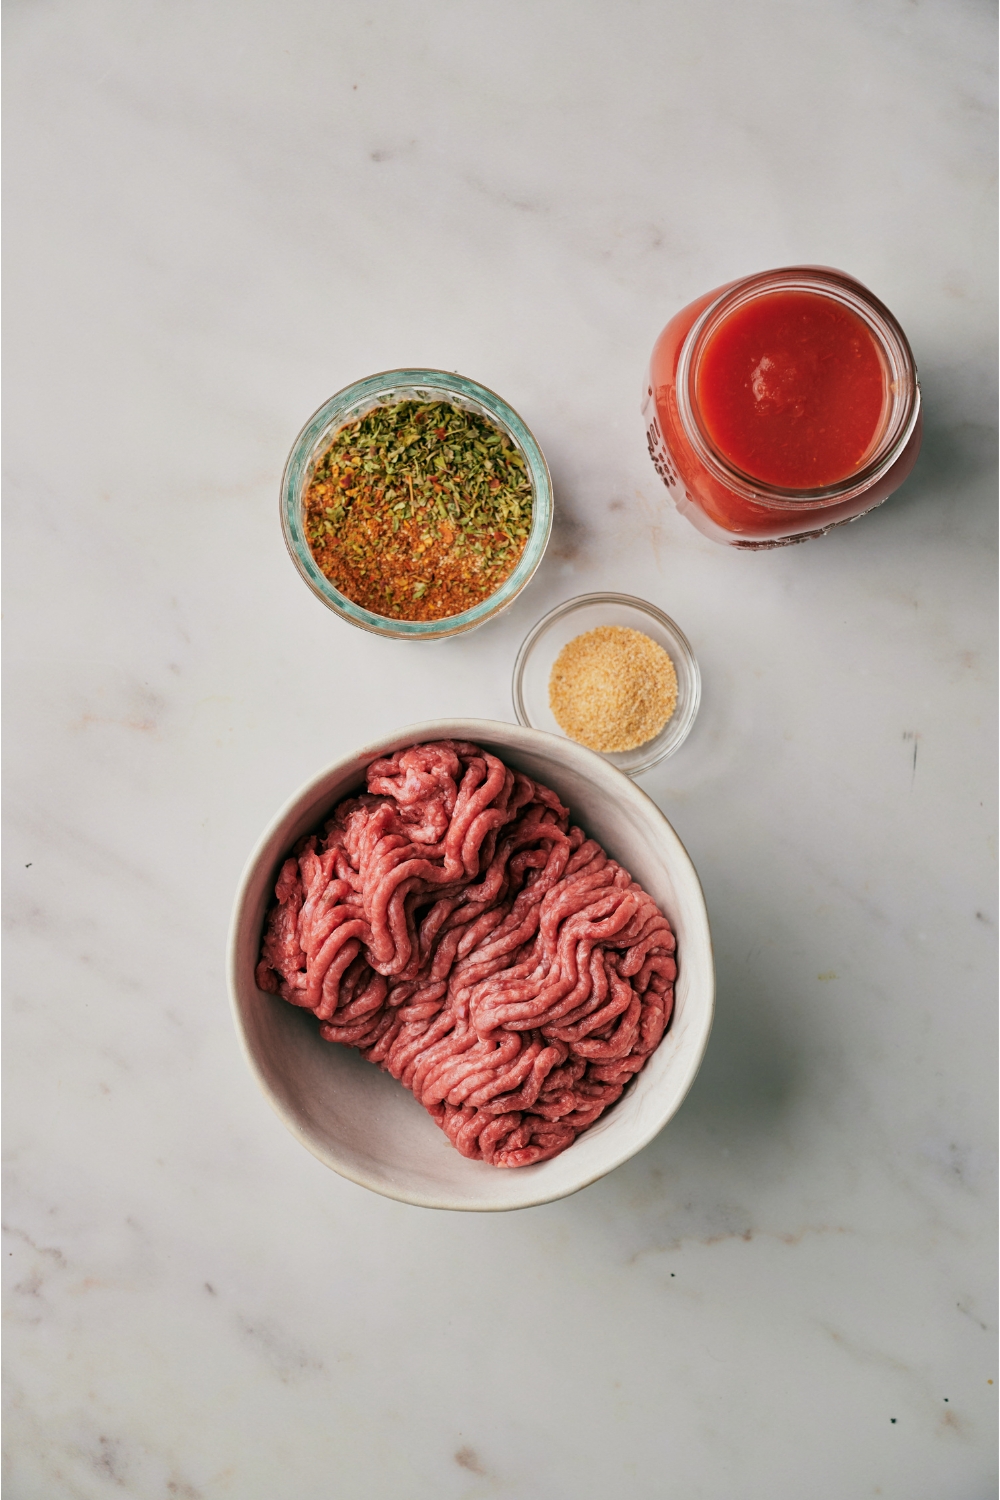 An assortment of ingredients including a bowl of raw ground beef, a jar of salsa, a bowl of taco seasoning, and a bowl of garlic powder.